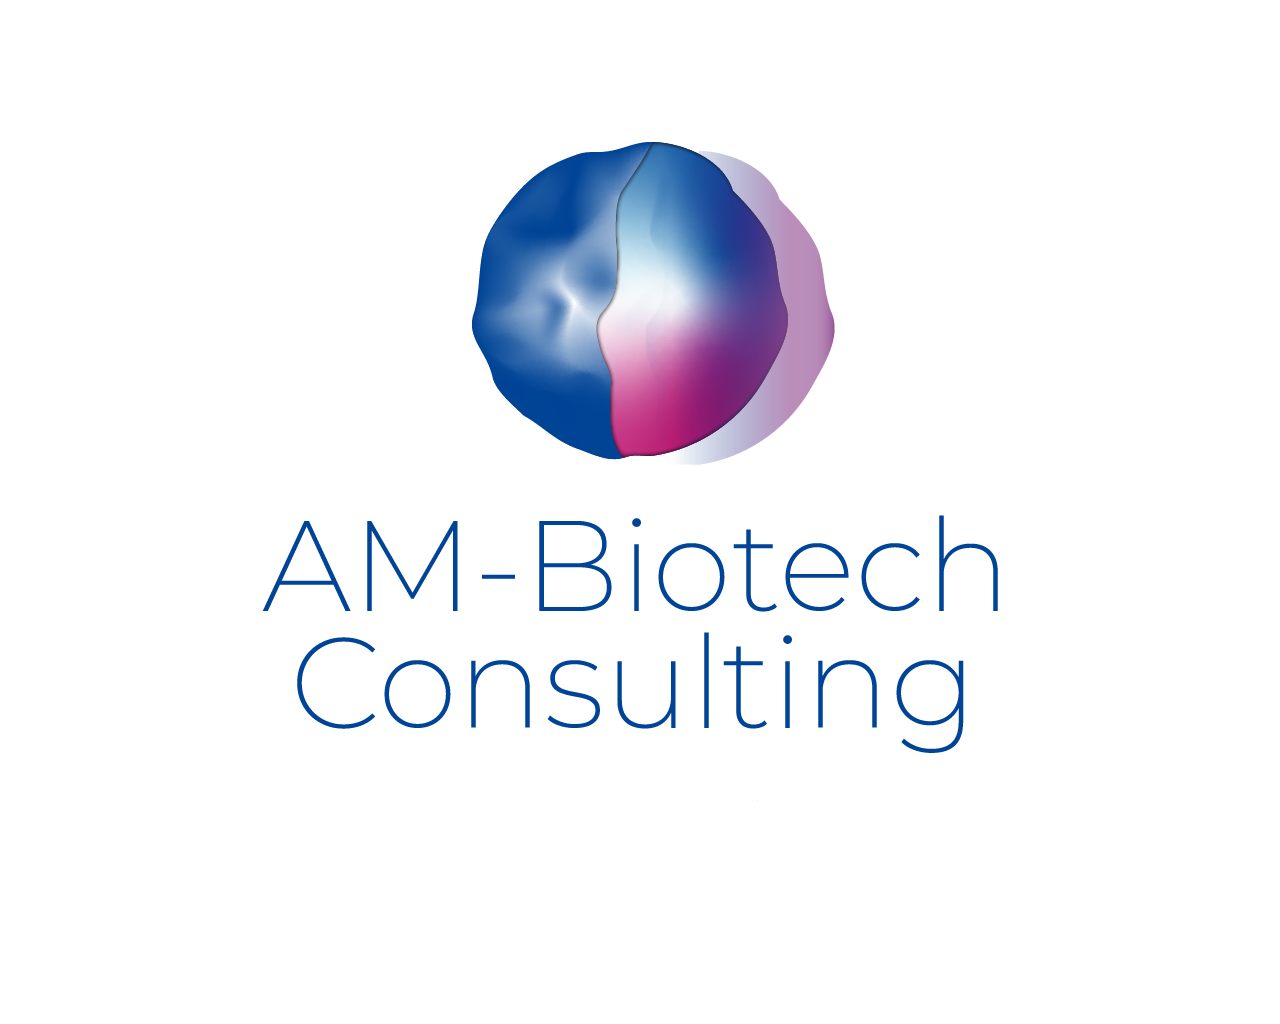 AM-Biotech Consulting